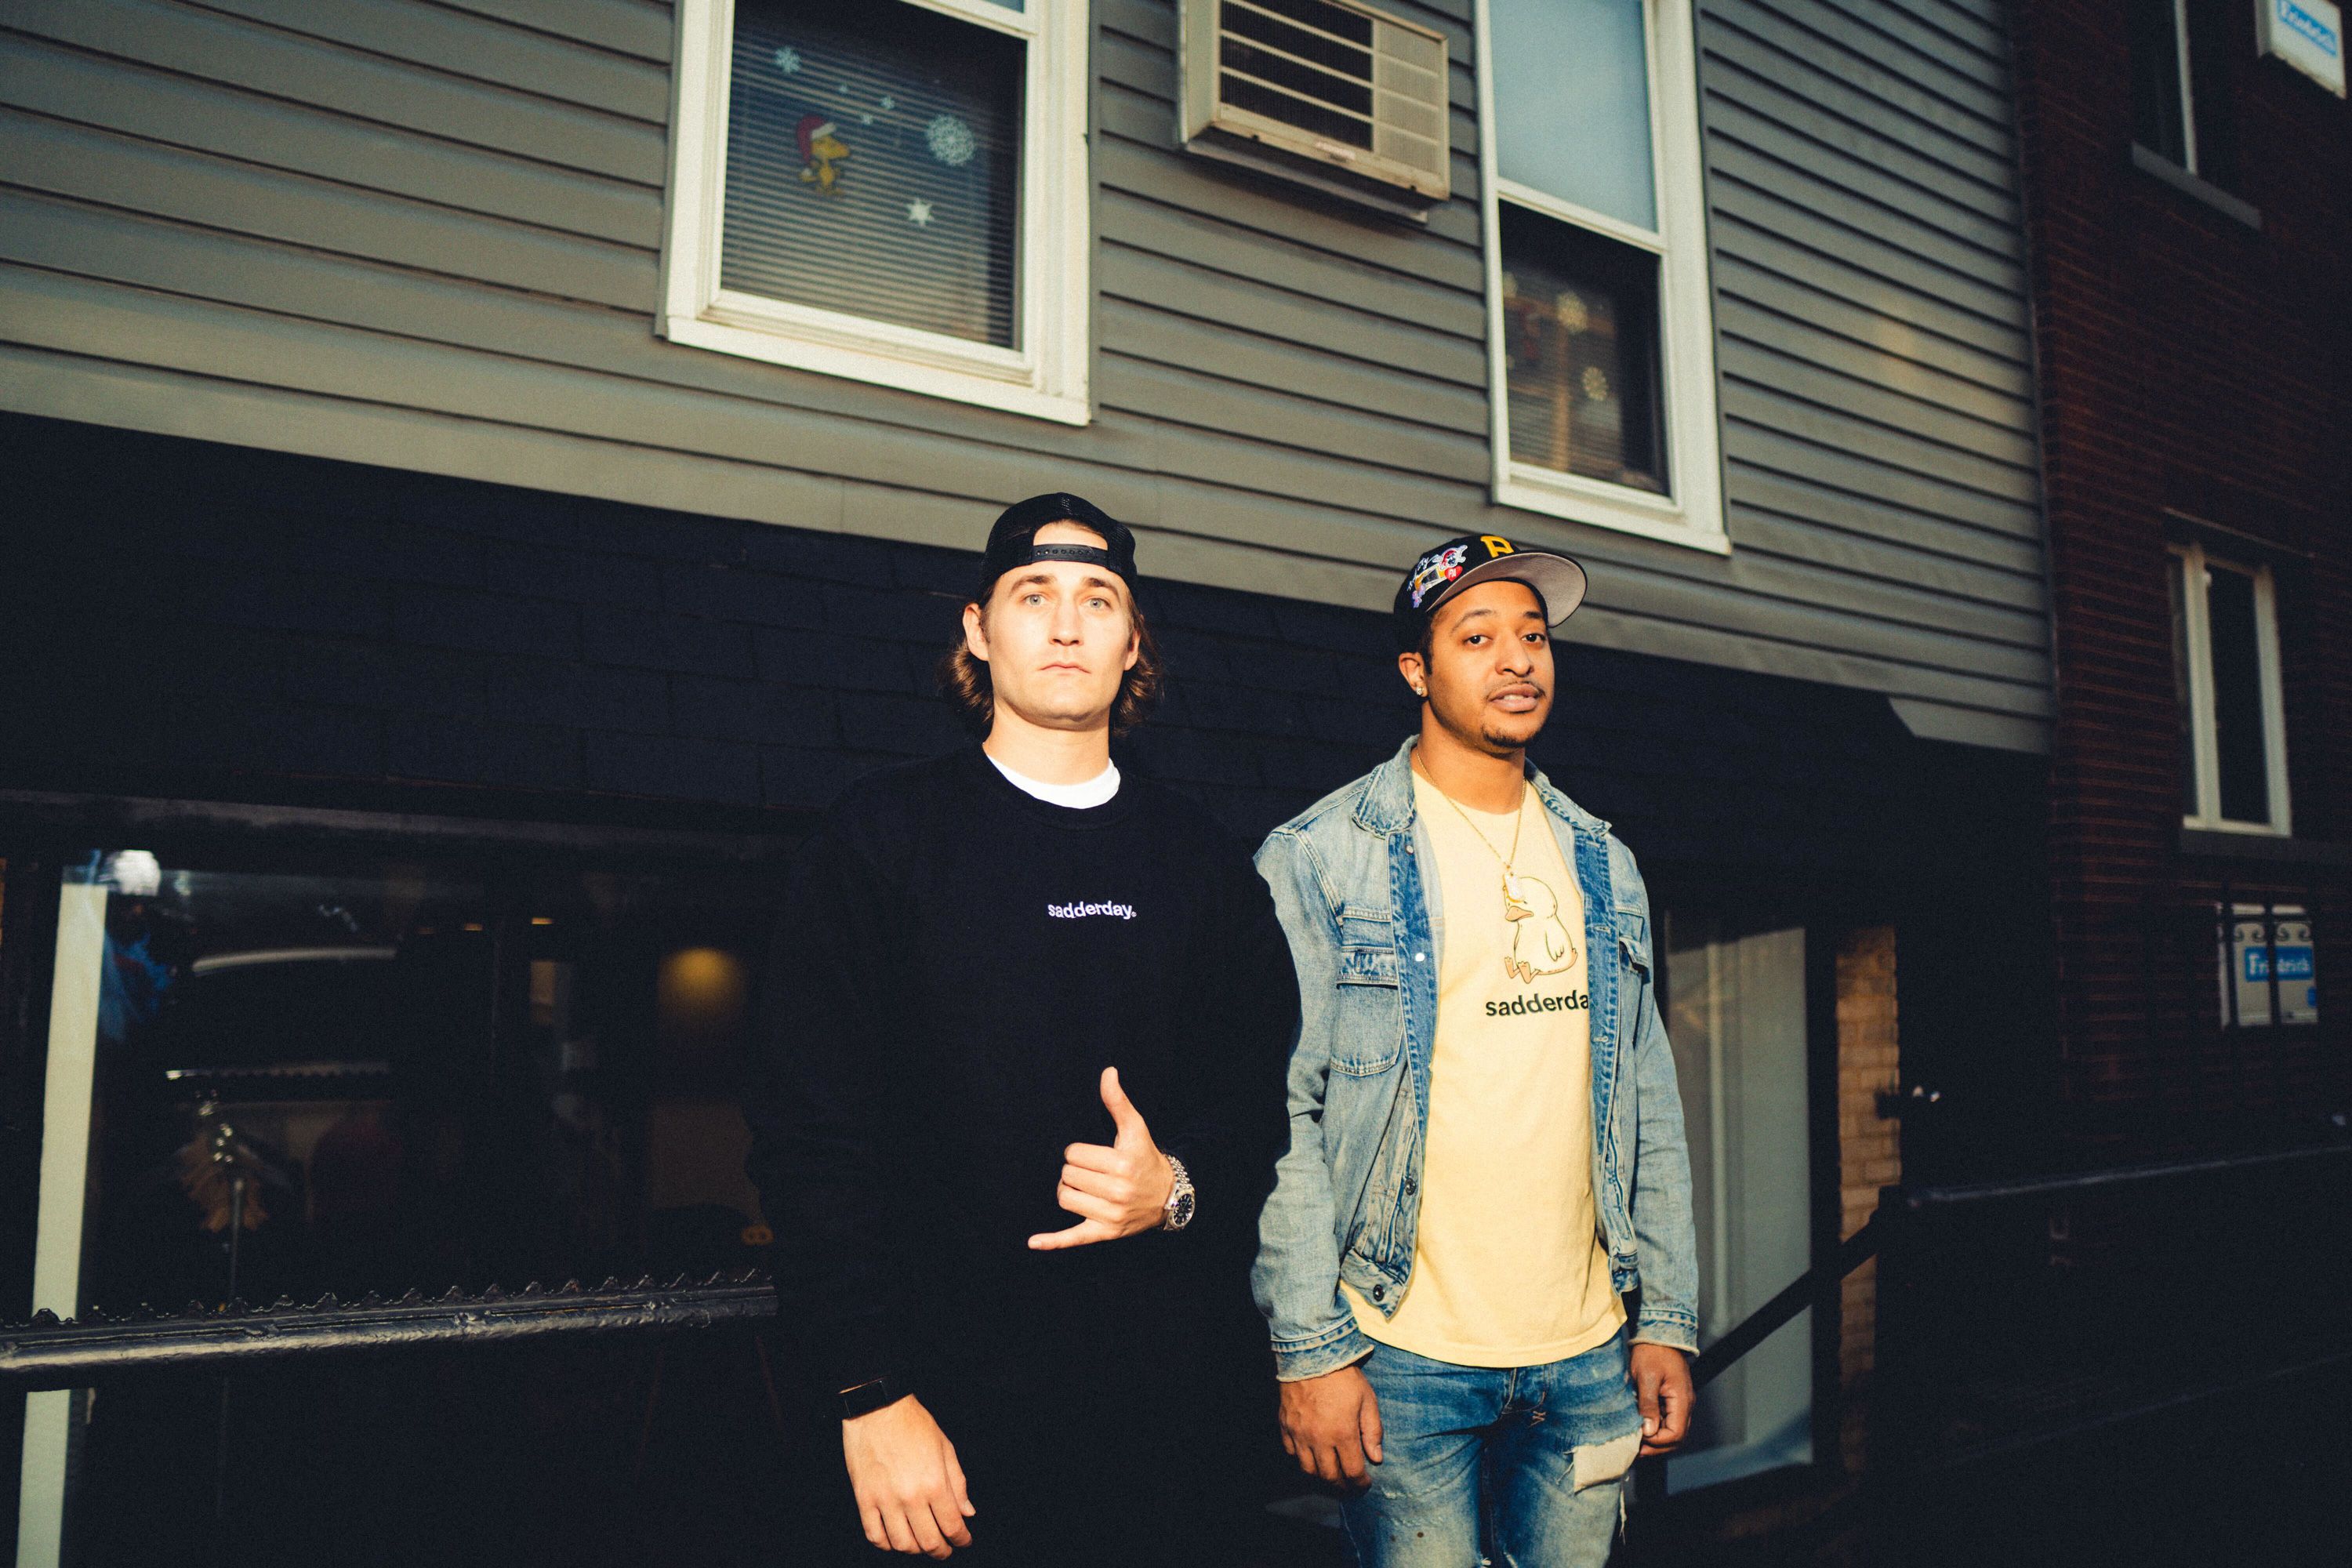 Sebastian Stant and Brandon Jenkins opened their first brick-and-mortar location for their streetwear brand “Sadderday” in Williamsburg in May.